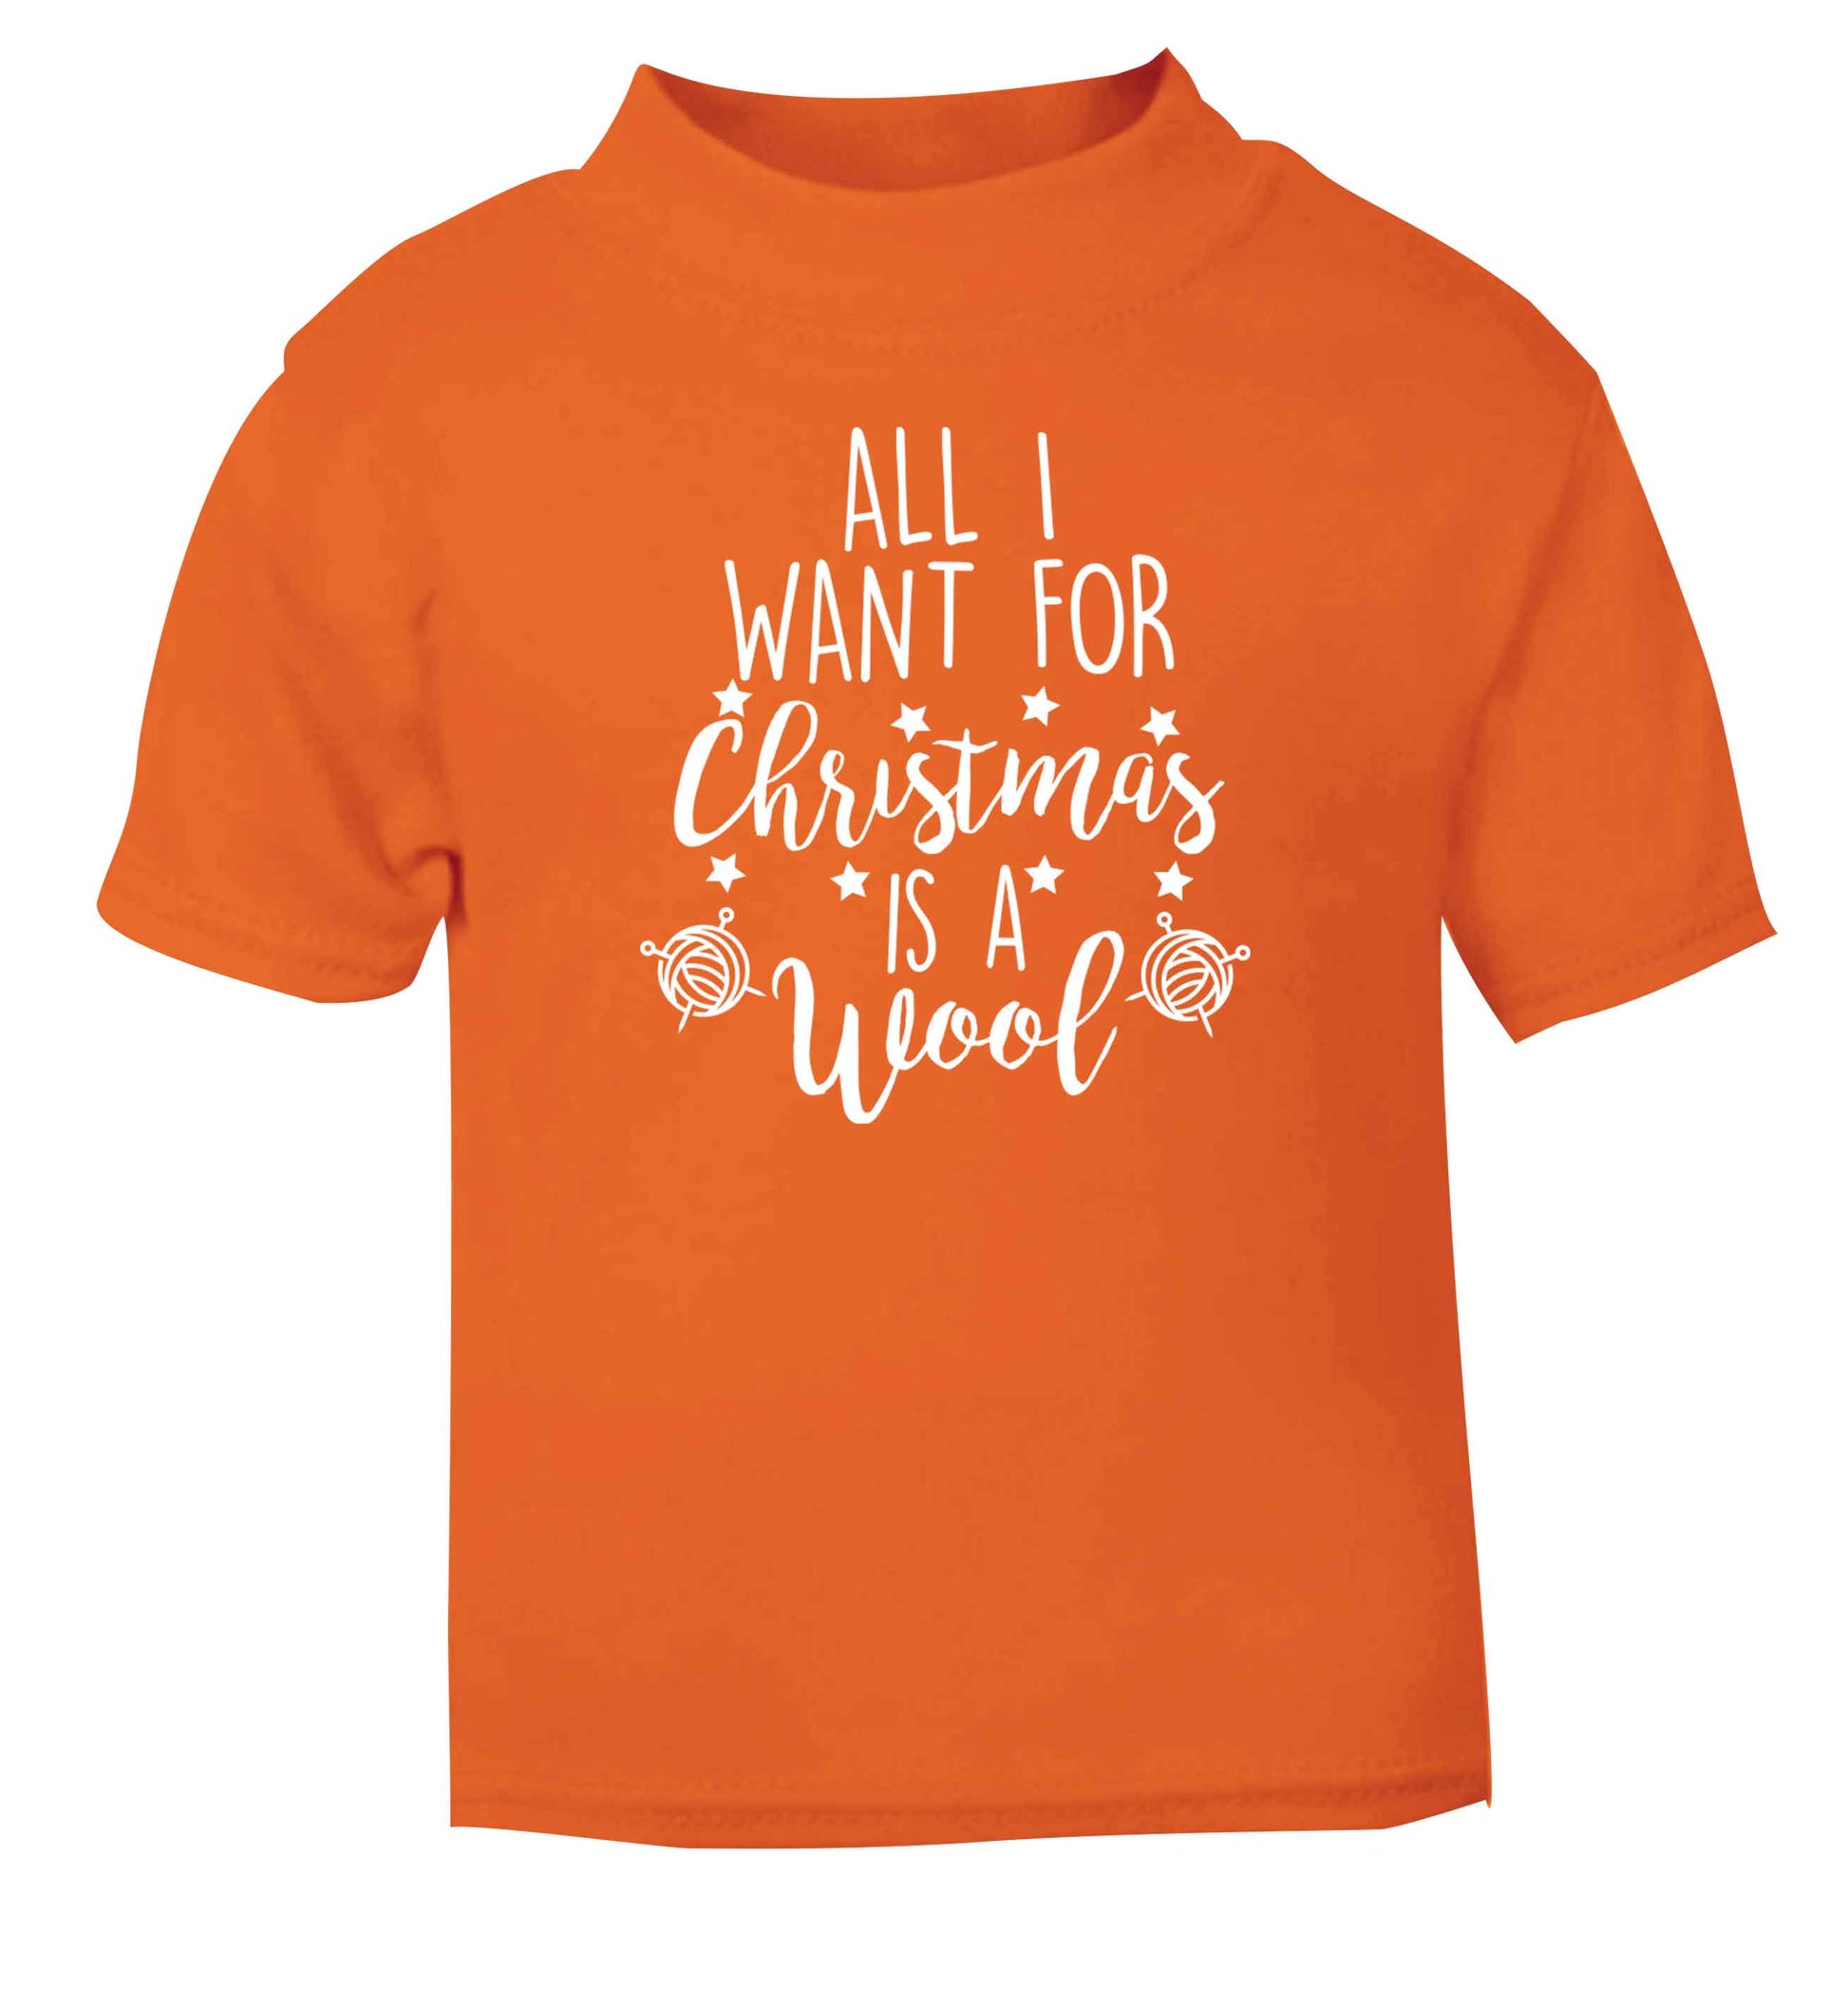 All I want for Christmas is wool! orange Baby Toddler Tshirt 2 Years